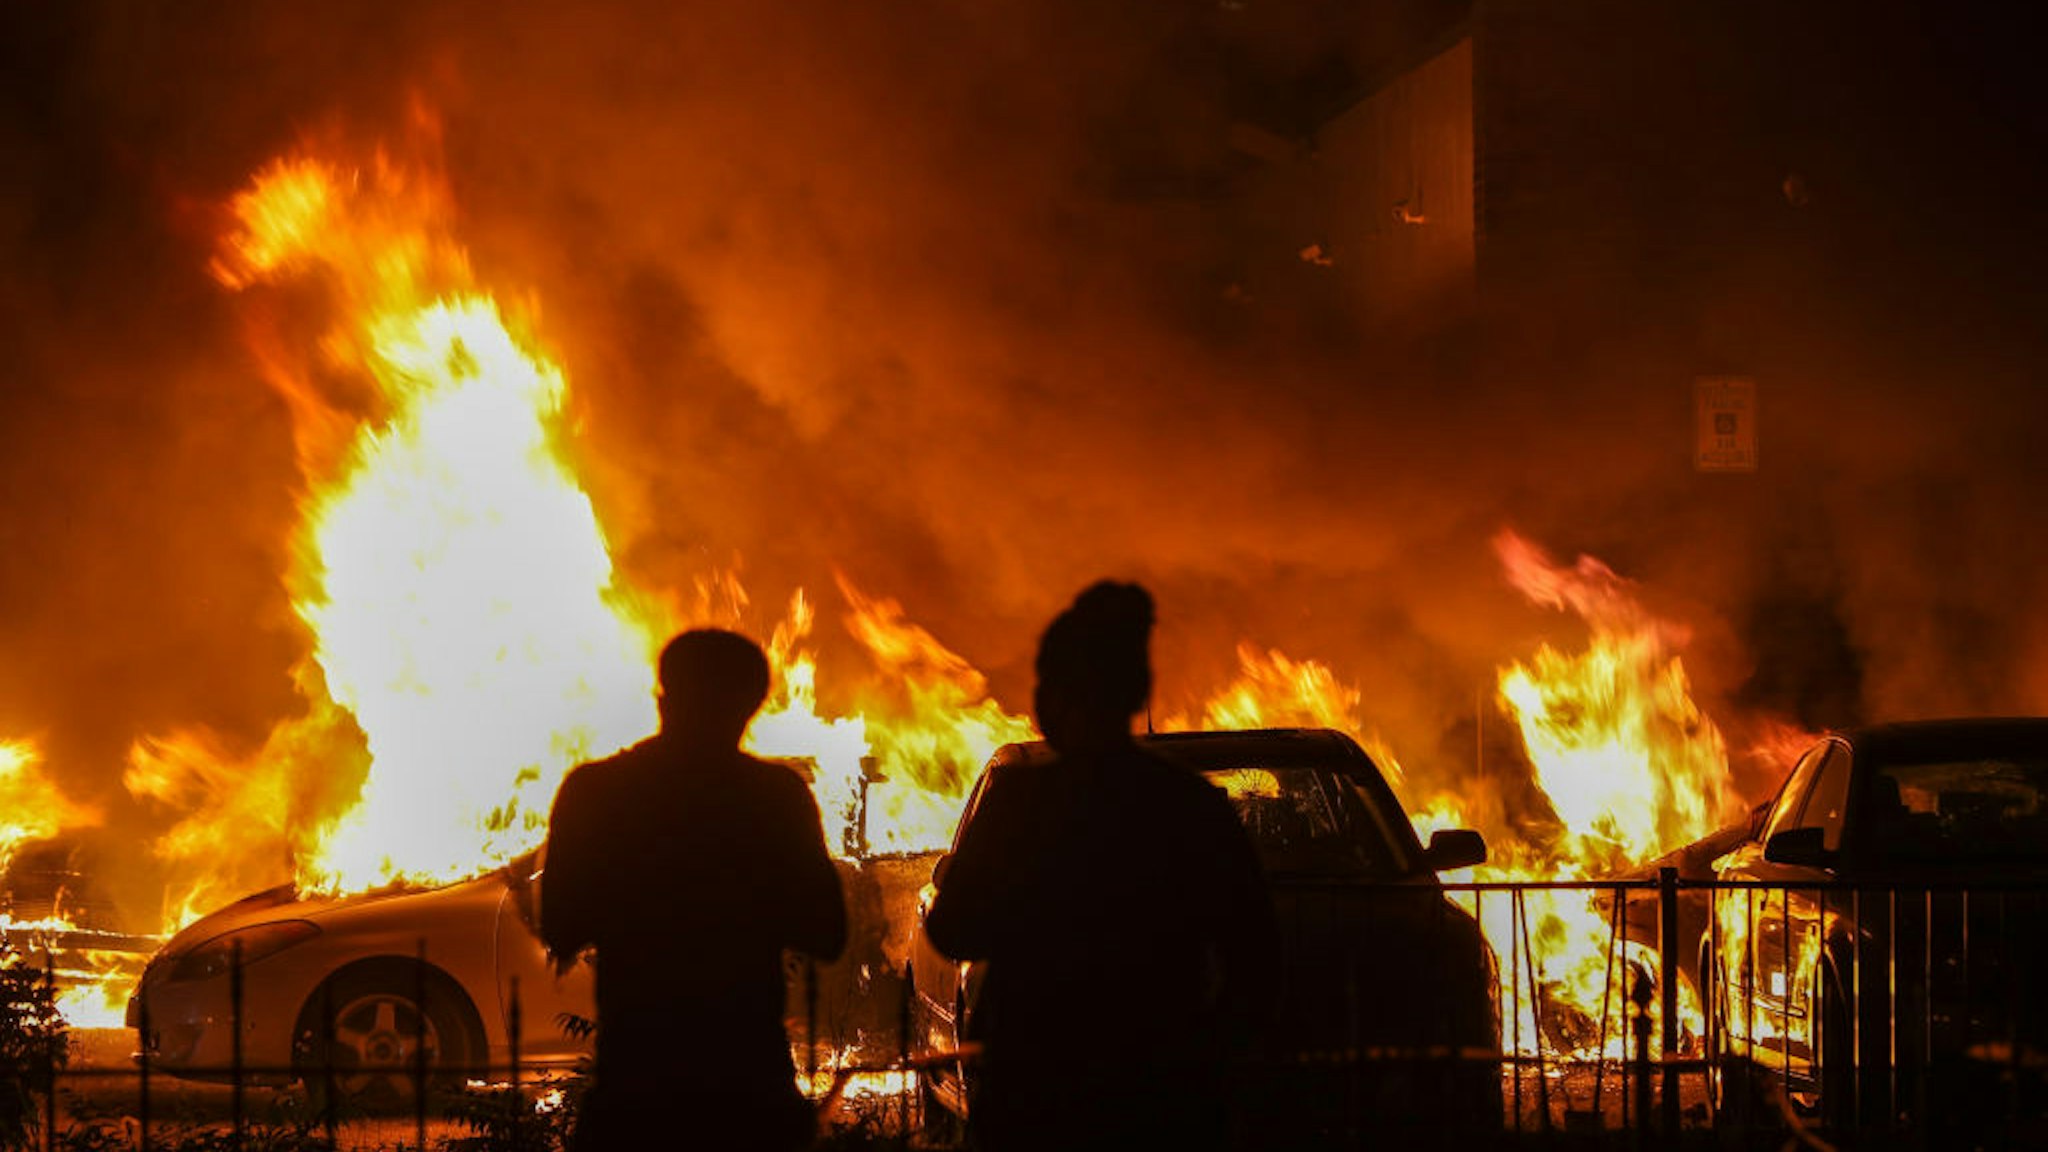 Jacob Blake protesters lit vehicles on fire in Kenosha, Wisconsin, United States on August 24, 2020.